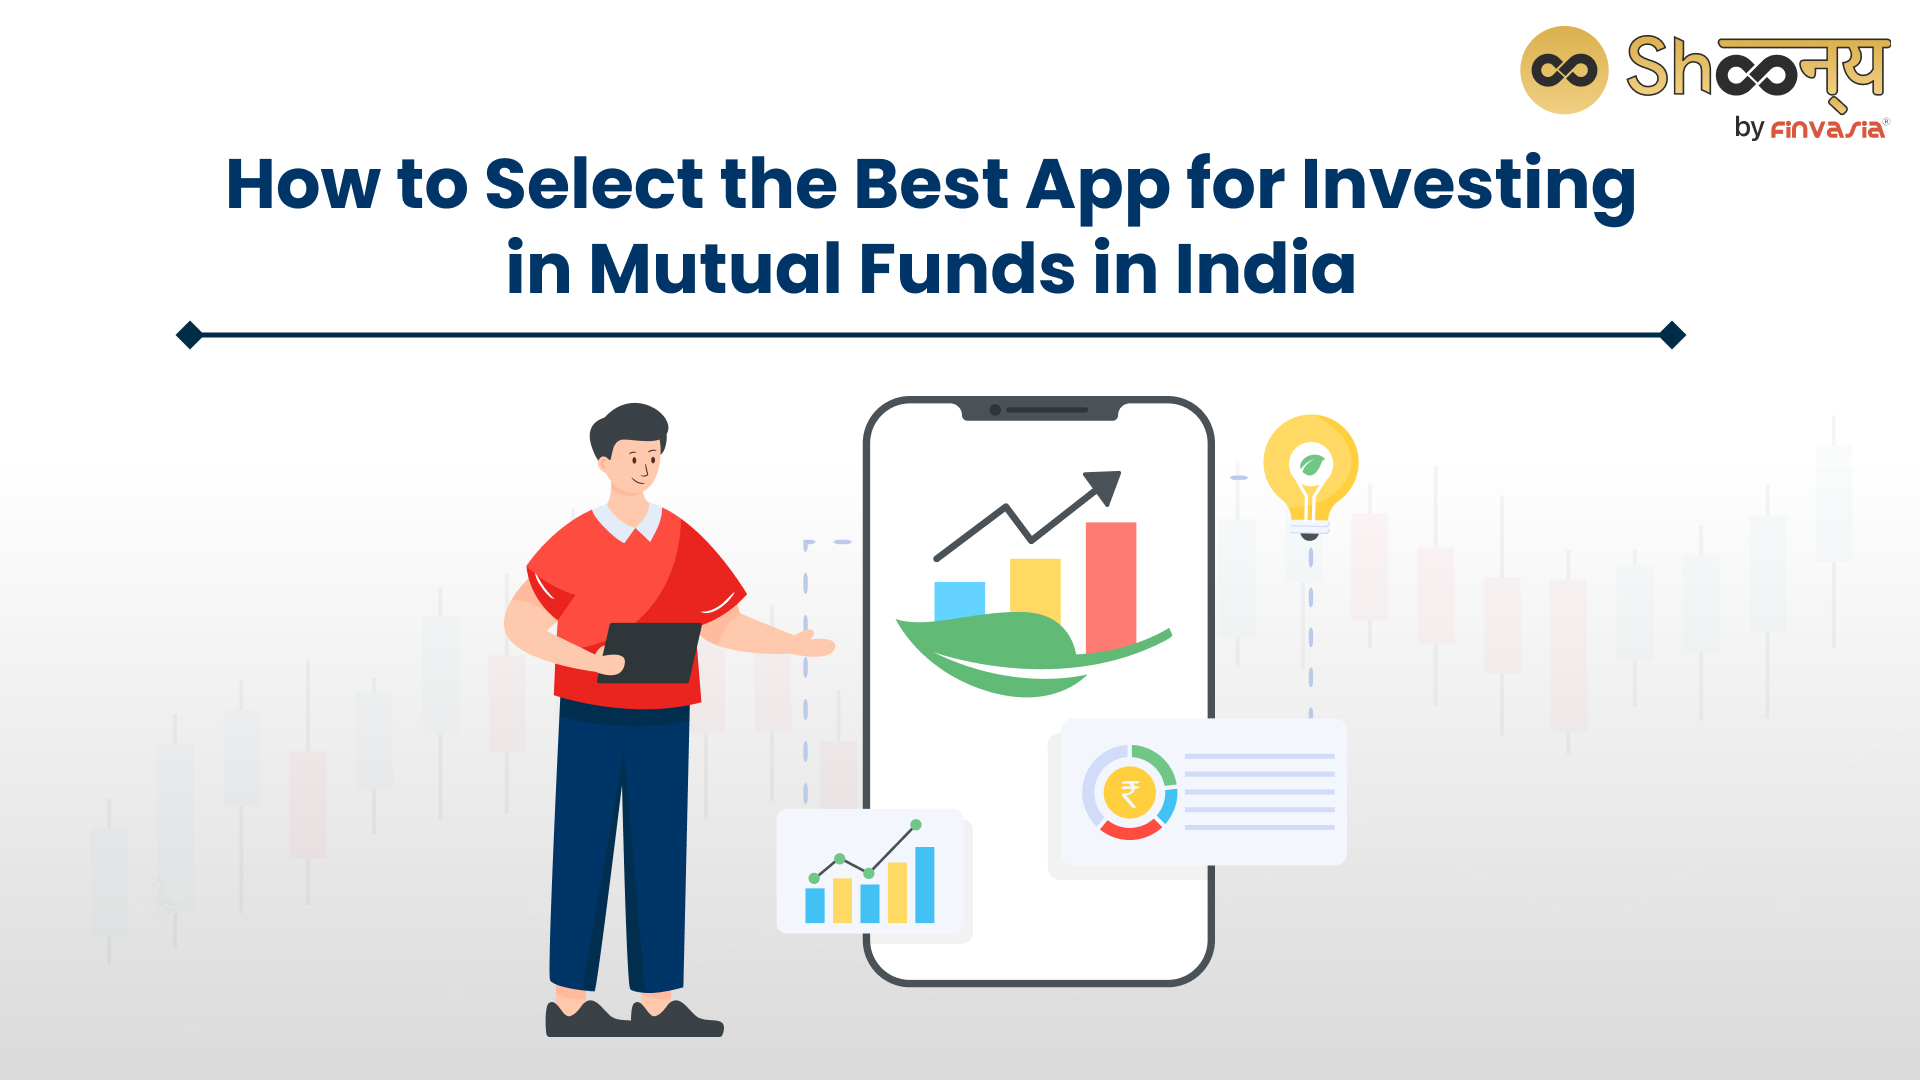 How to Select the Best App for Investing in Mutual Funds in India